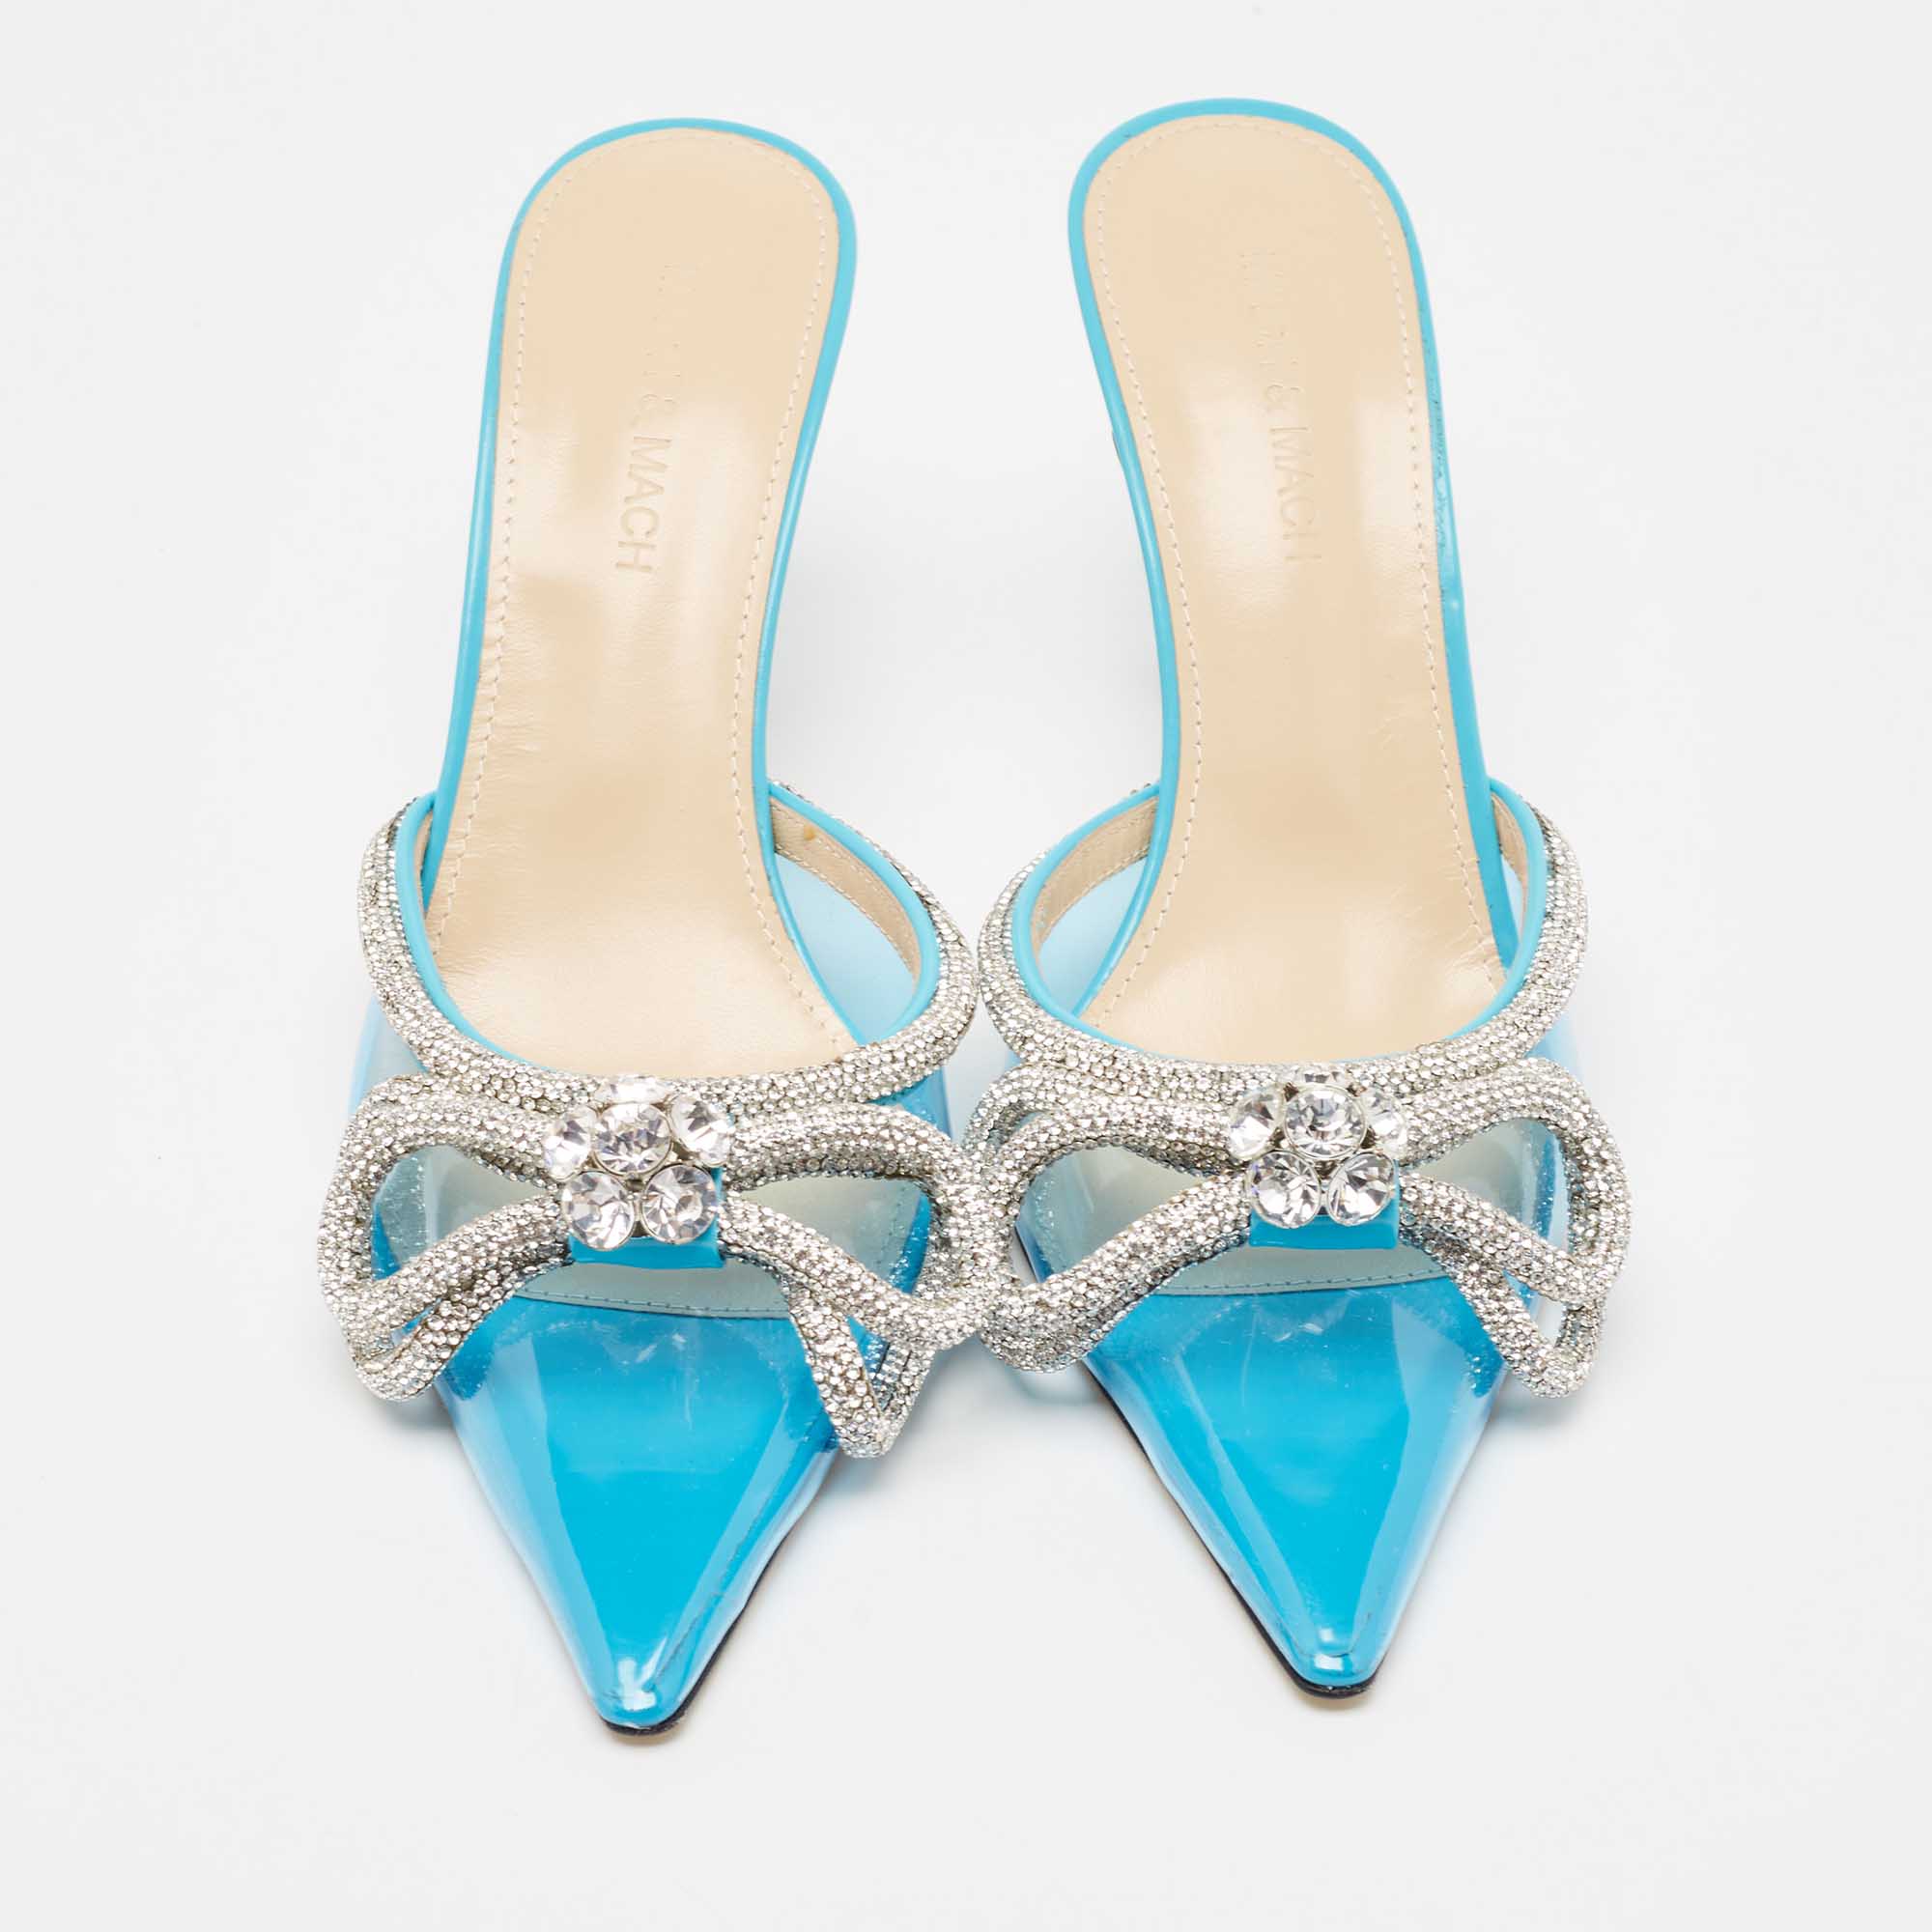 Mach & Mach Blue PVC Crystal Embellished Double Bow Mules Size 39